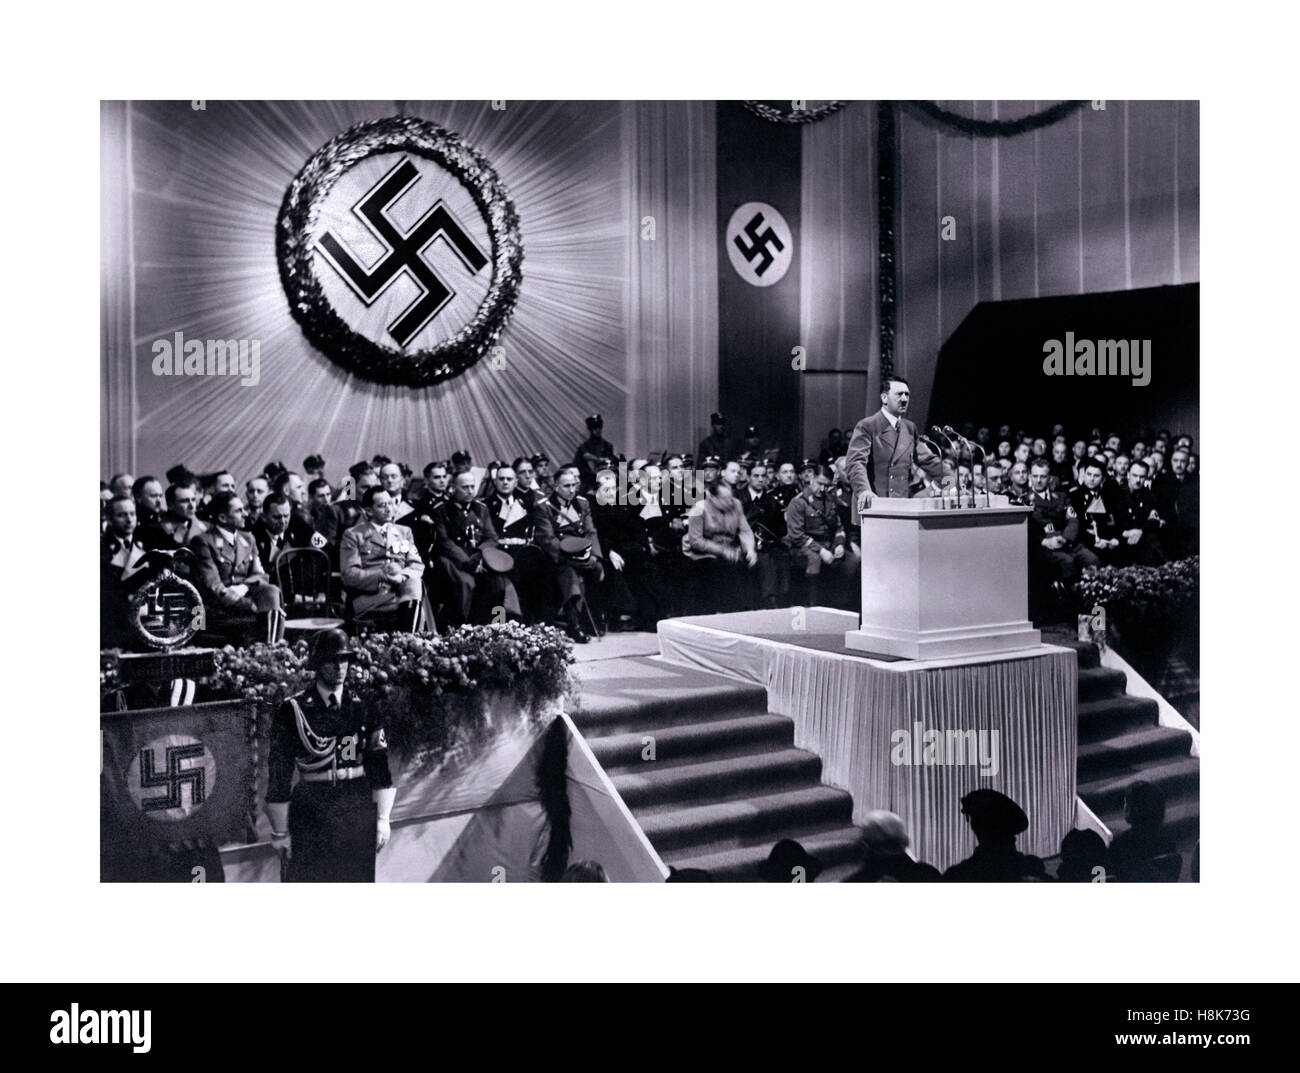 Adolf Hitler Speech, 1939 speaking under a large shining swastika emblem at a podium speech meeting with other ranking Nazi party supporters 1939 Berlin Germany Stock Photo